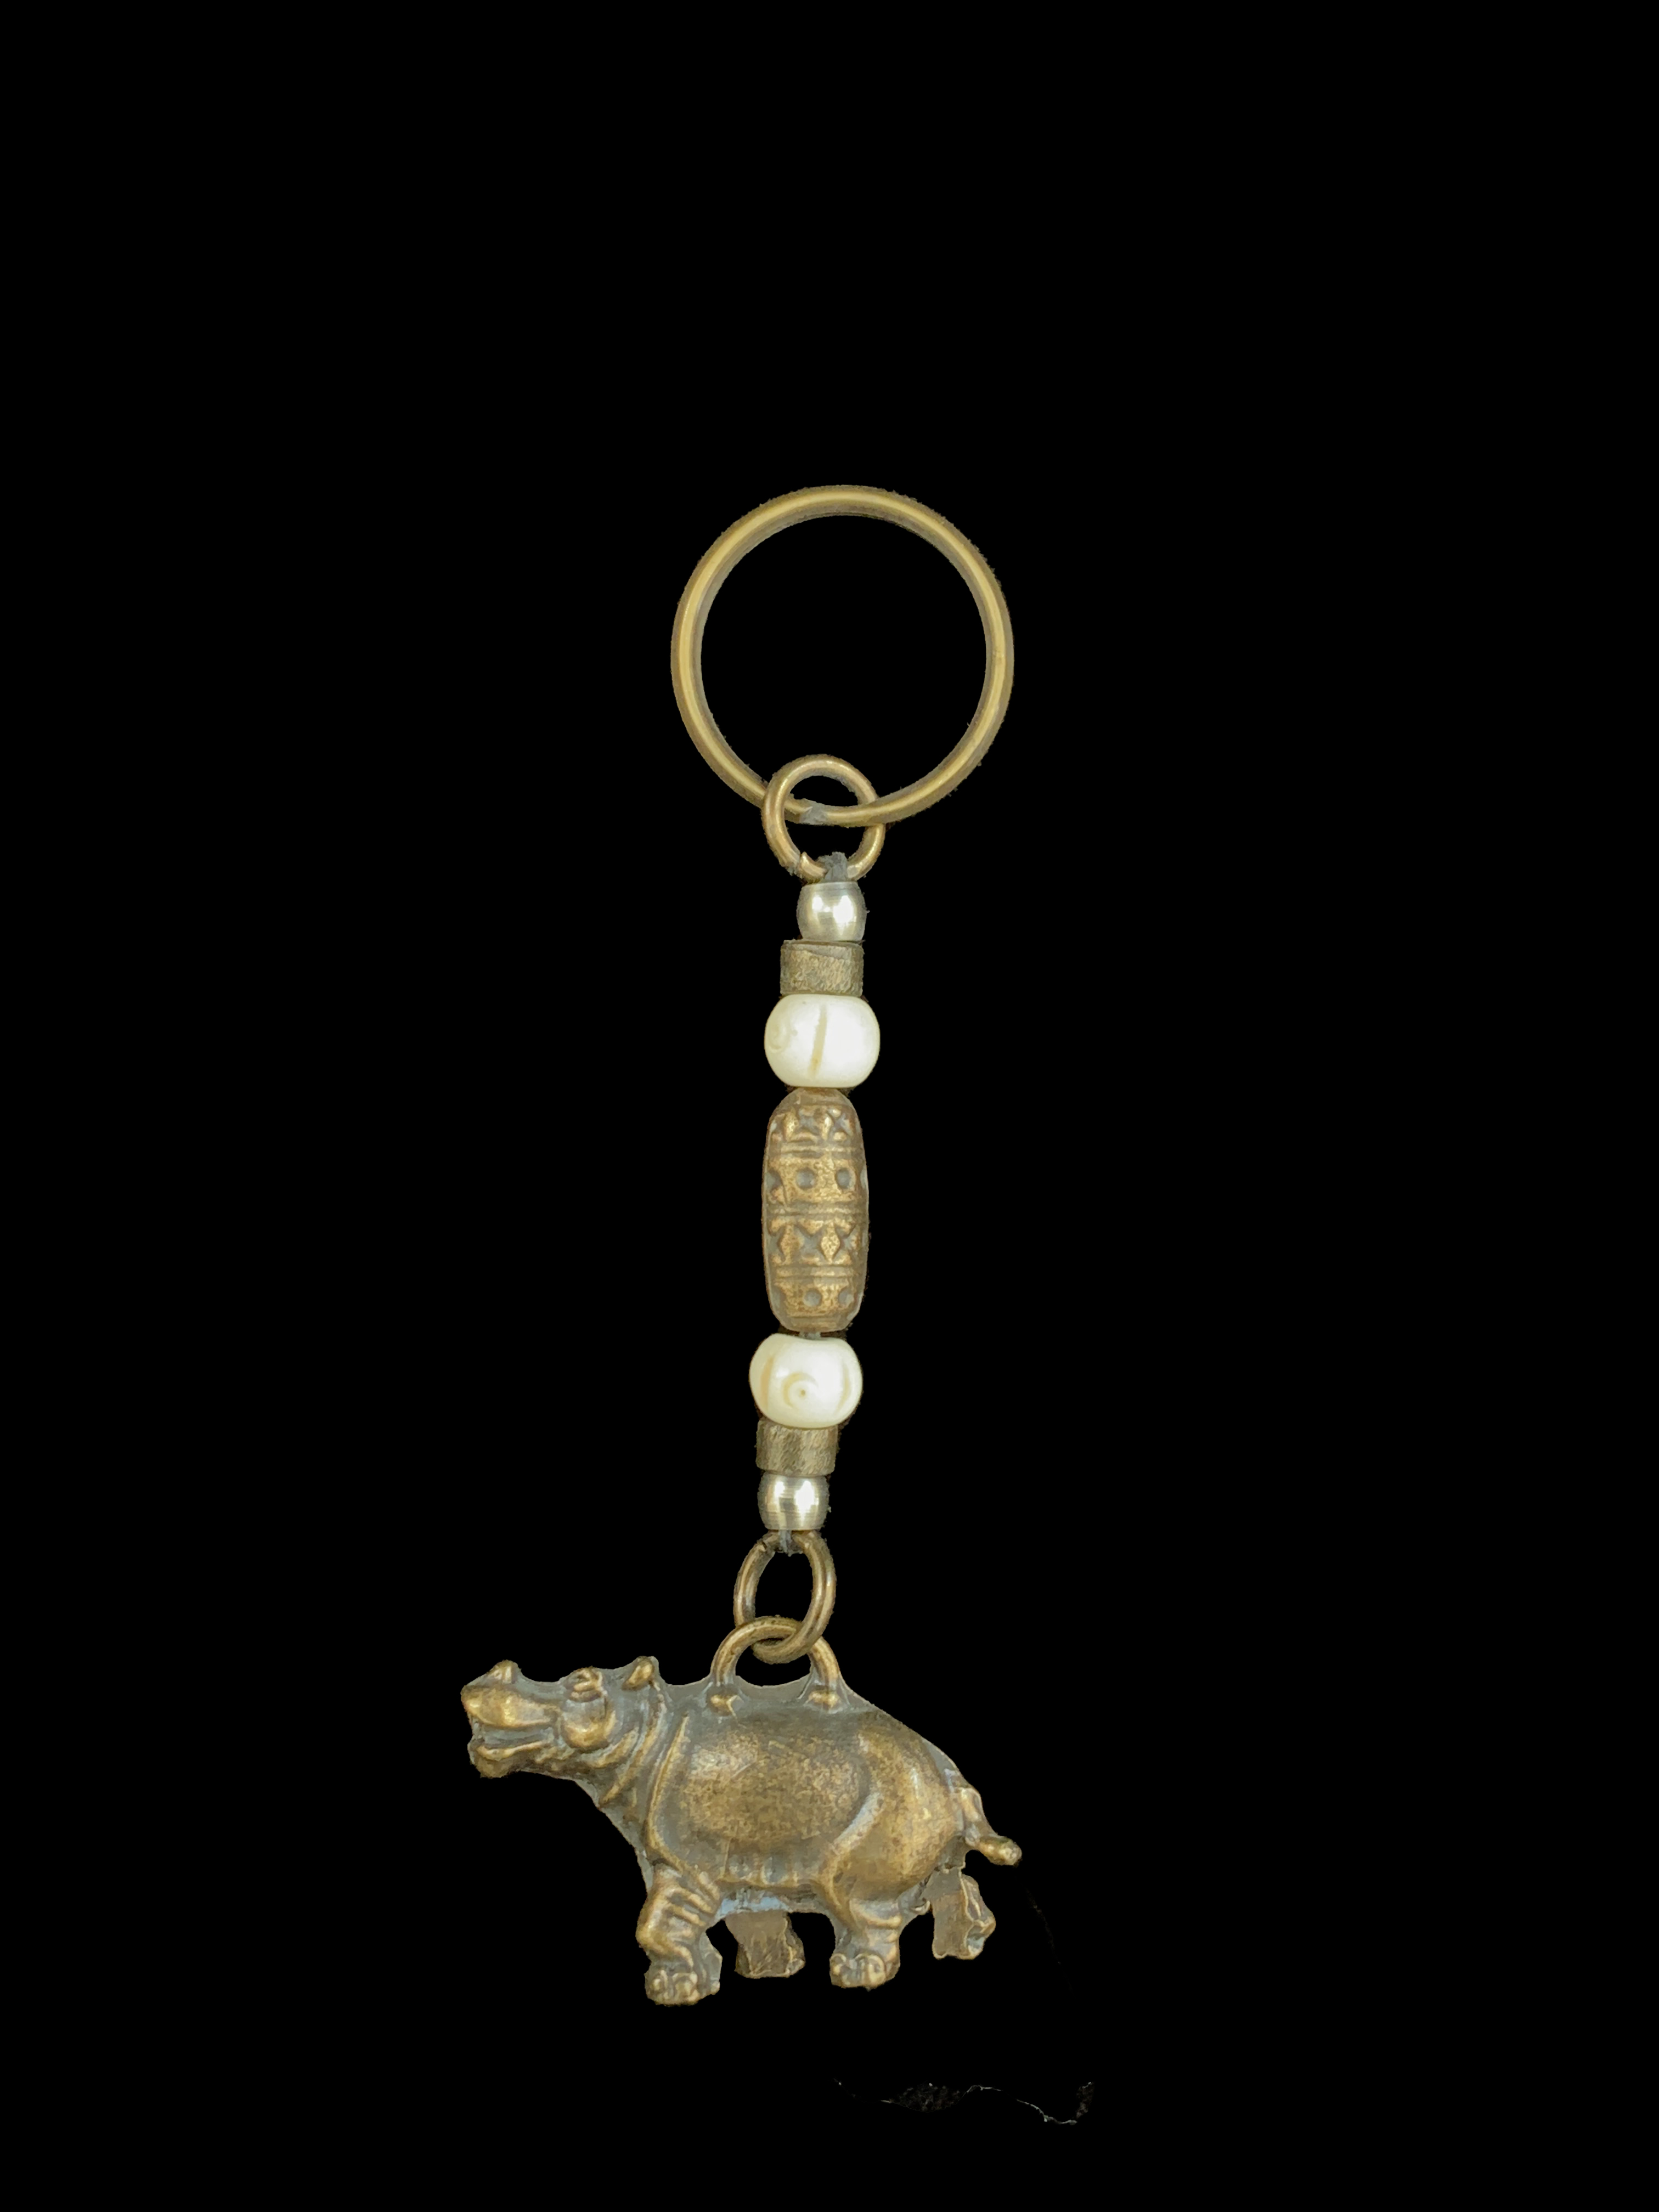 Hippo Key Ring - South Africa